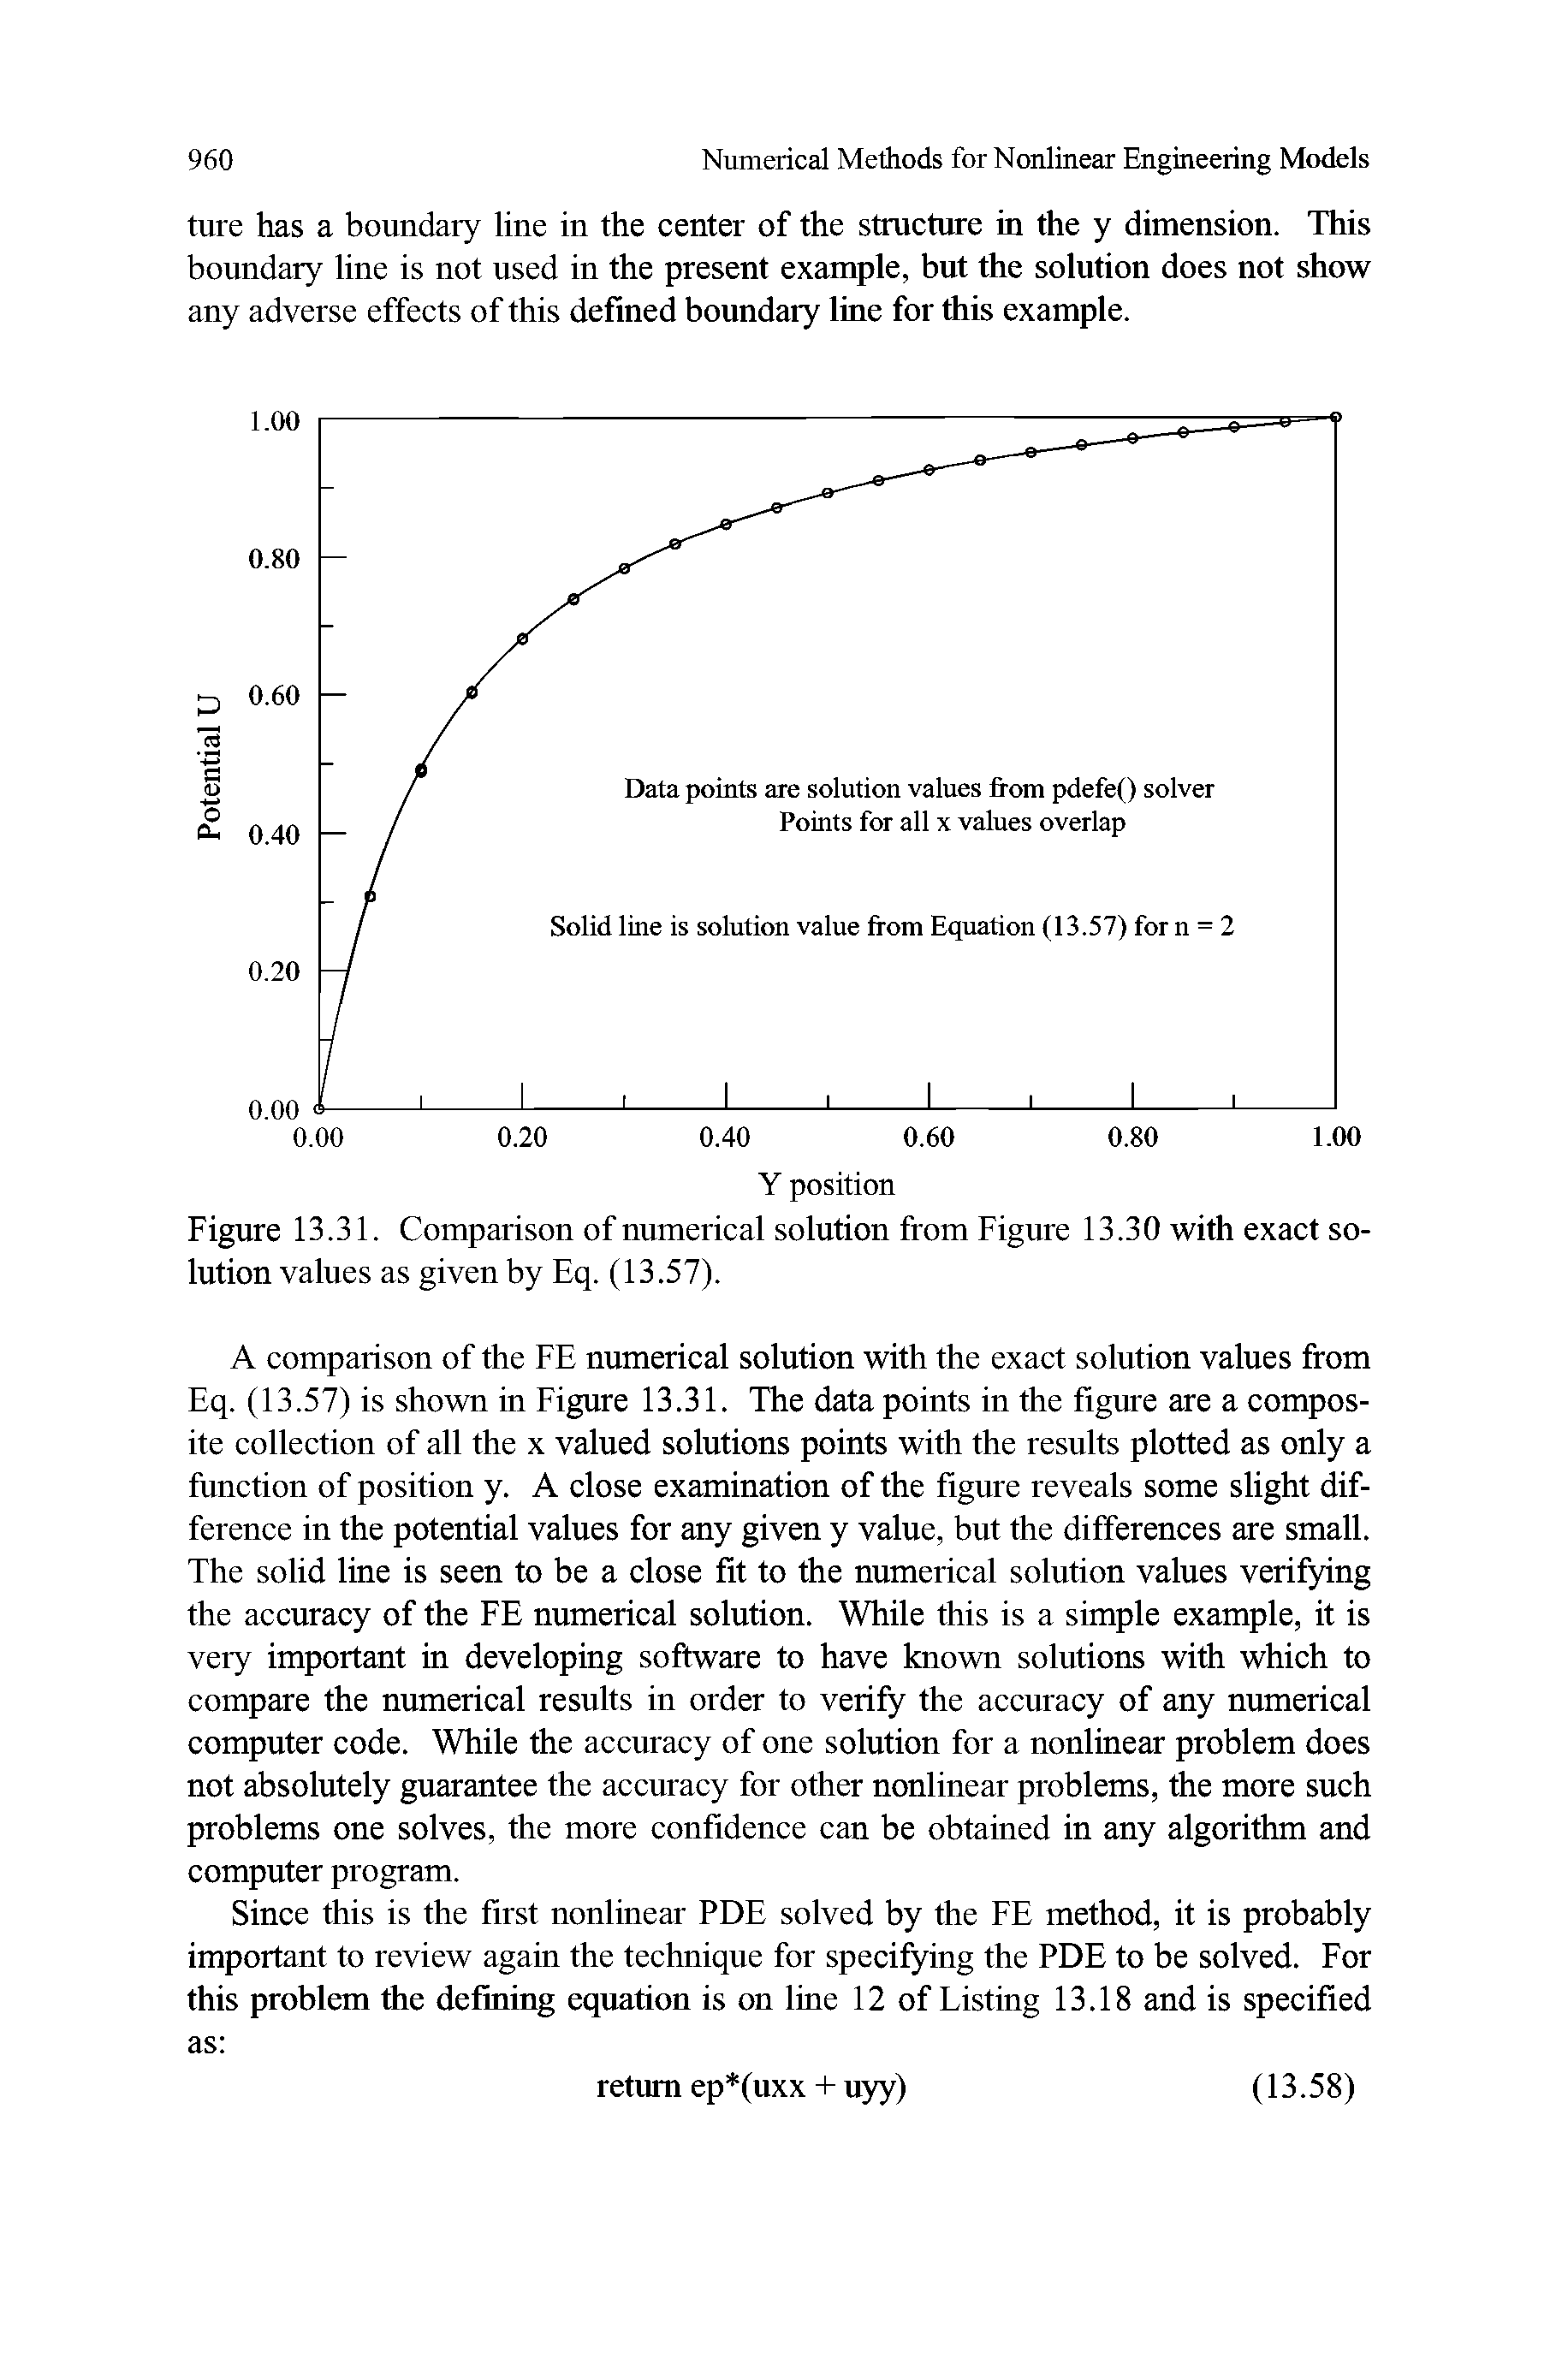 Figure 13.31. Comparison of numerical solution from Figure 13.30 with exact solution values as given by Eq. (13.57).